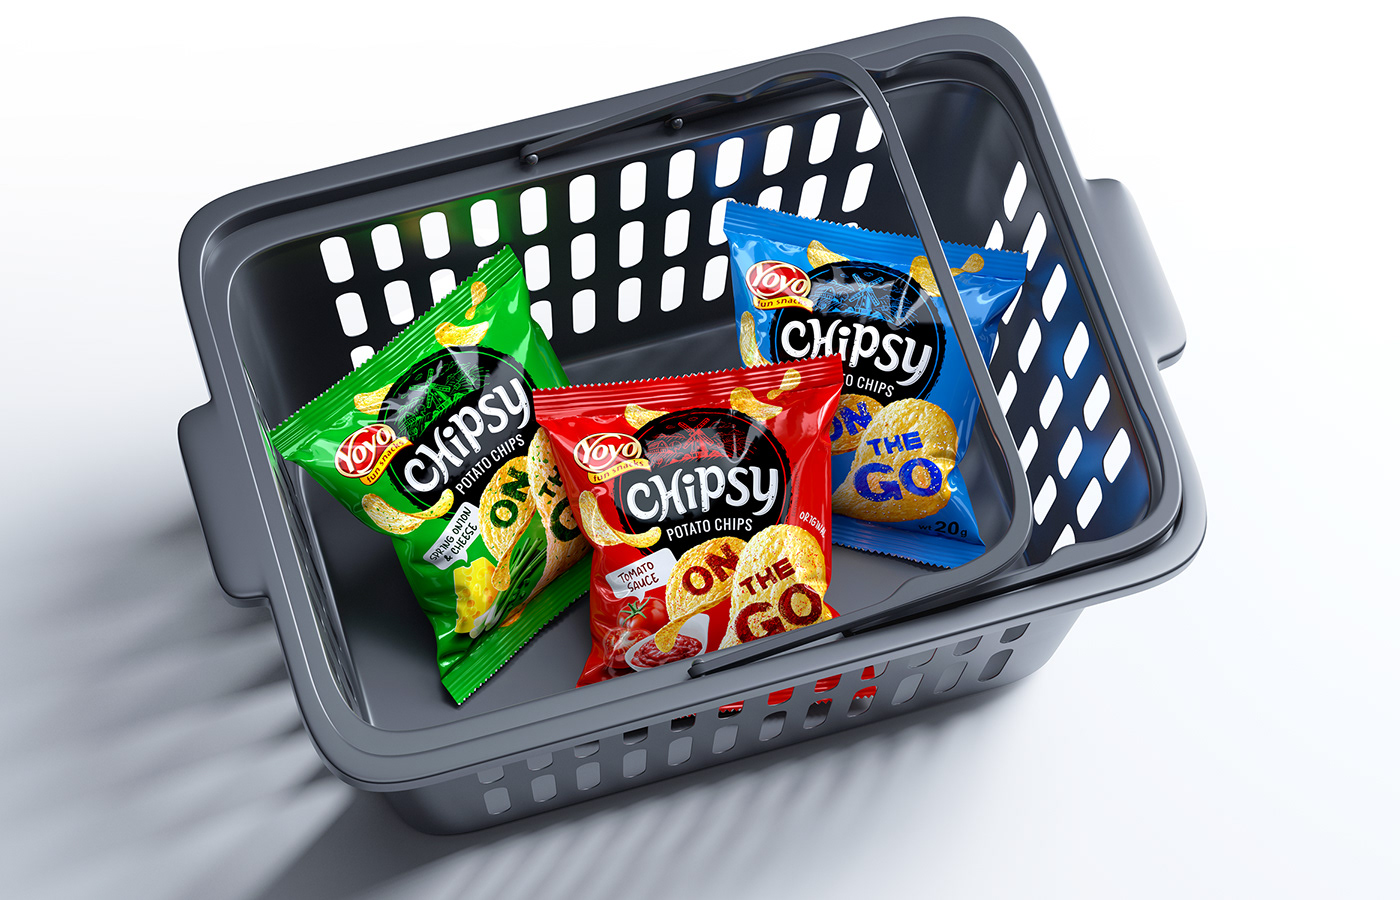 potatoes chips snacks Food  packaging design logo trademark chipsy on the go yoyo foods